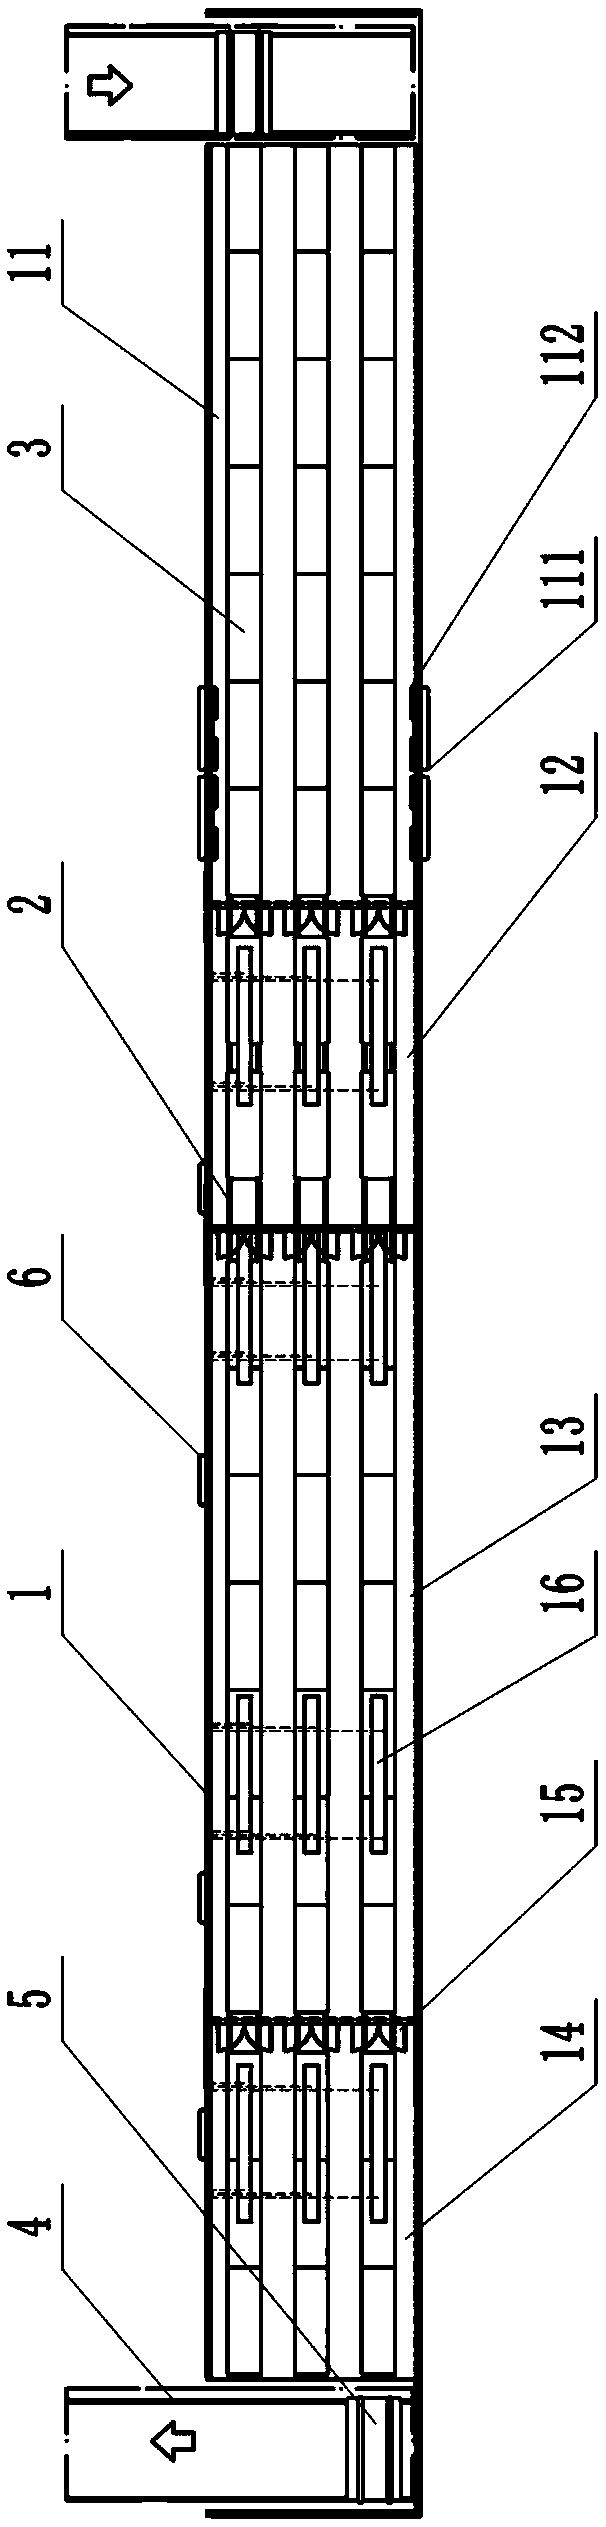 Efficient prefabricated concrete shield segment steam-curing kiln and application method thereof